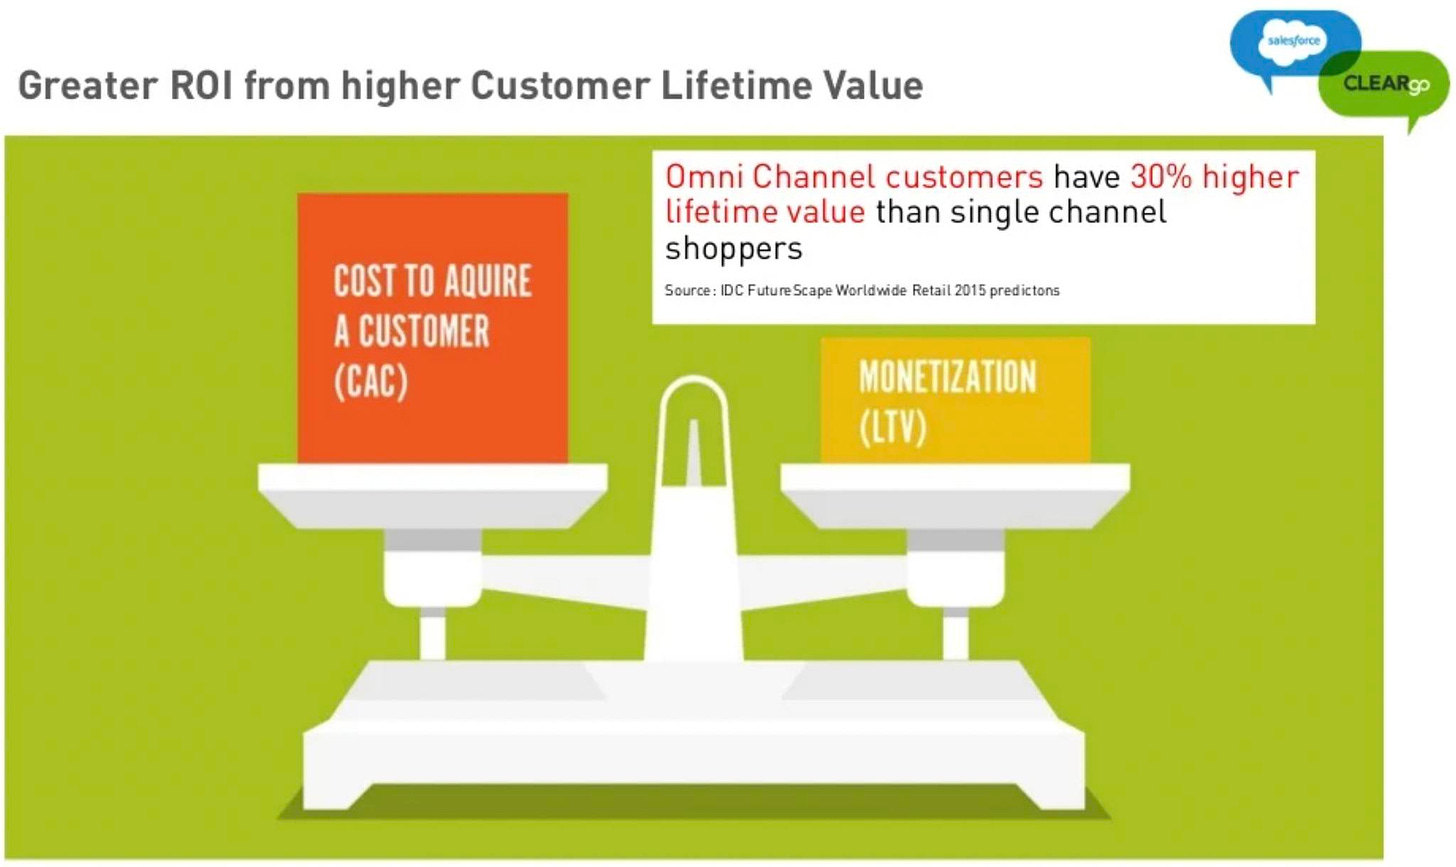 May be an image of text that says "Greater ROI from higher Customer Lifetime Value sales/orce CLEARgo COST TO AQUIRE A CUSTOMER (CAC) Omni Channel customers have 30% higher lifetime value than single channel shoppers Source: Scape Worldwide Retail 2015 predictons MONETIZATION (LTV)"